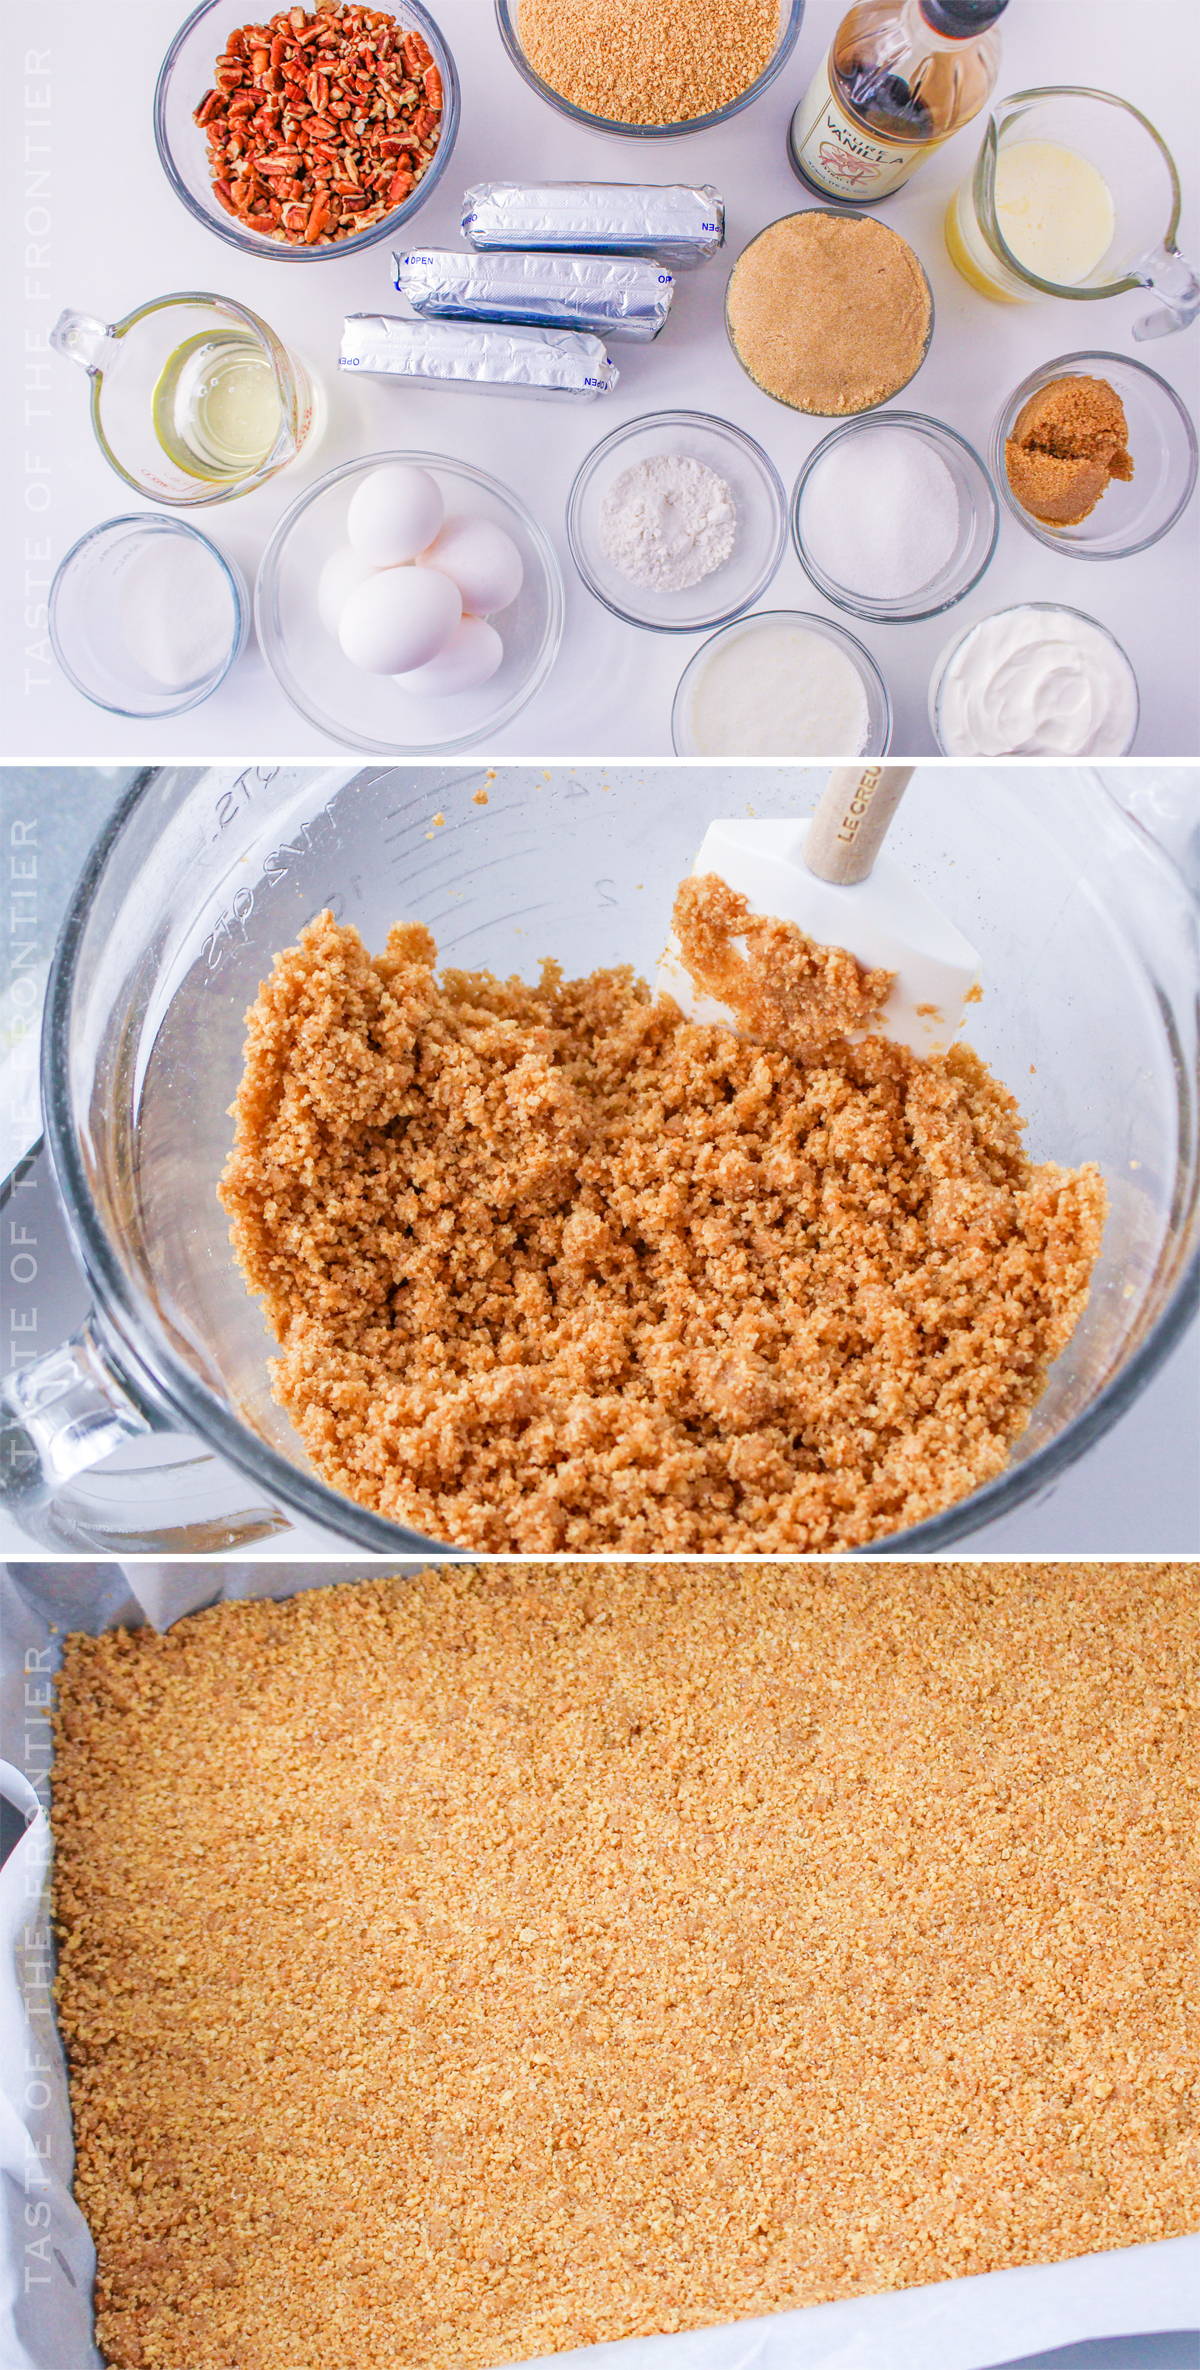 Ingredients for Pecan Pie Cheesecake Bars